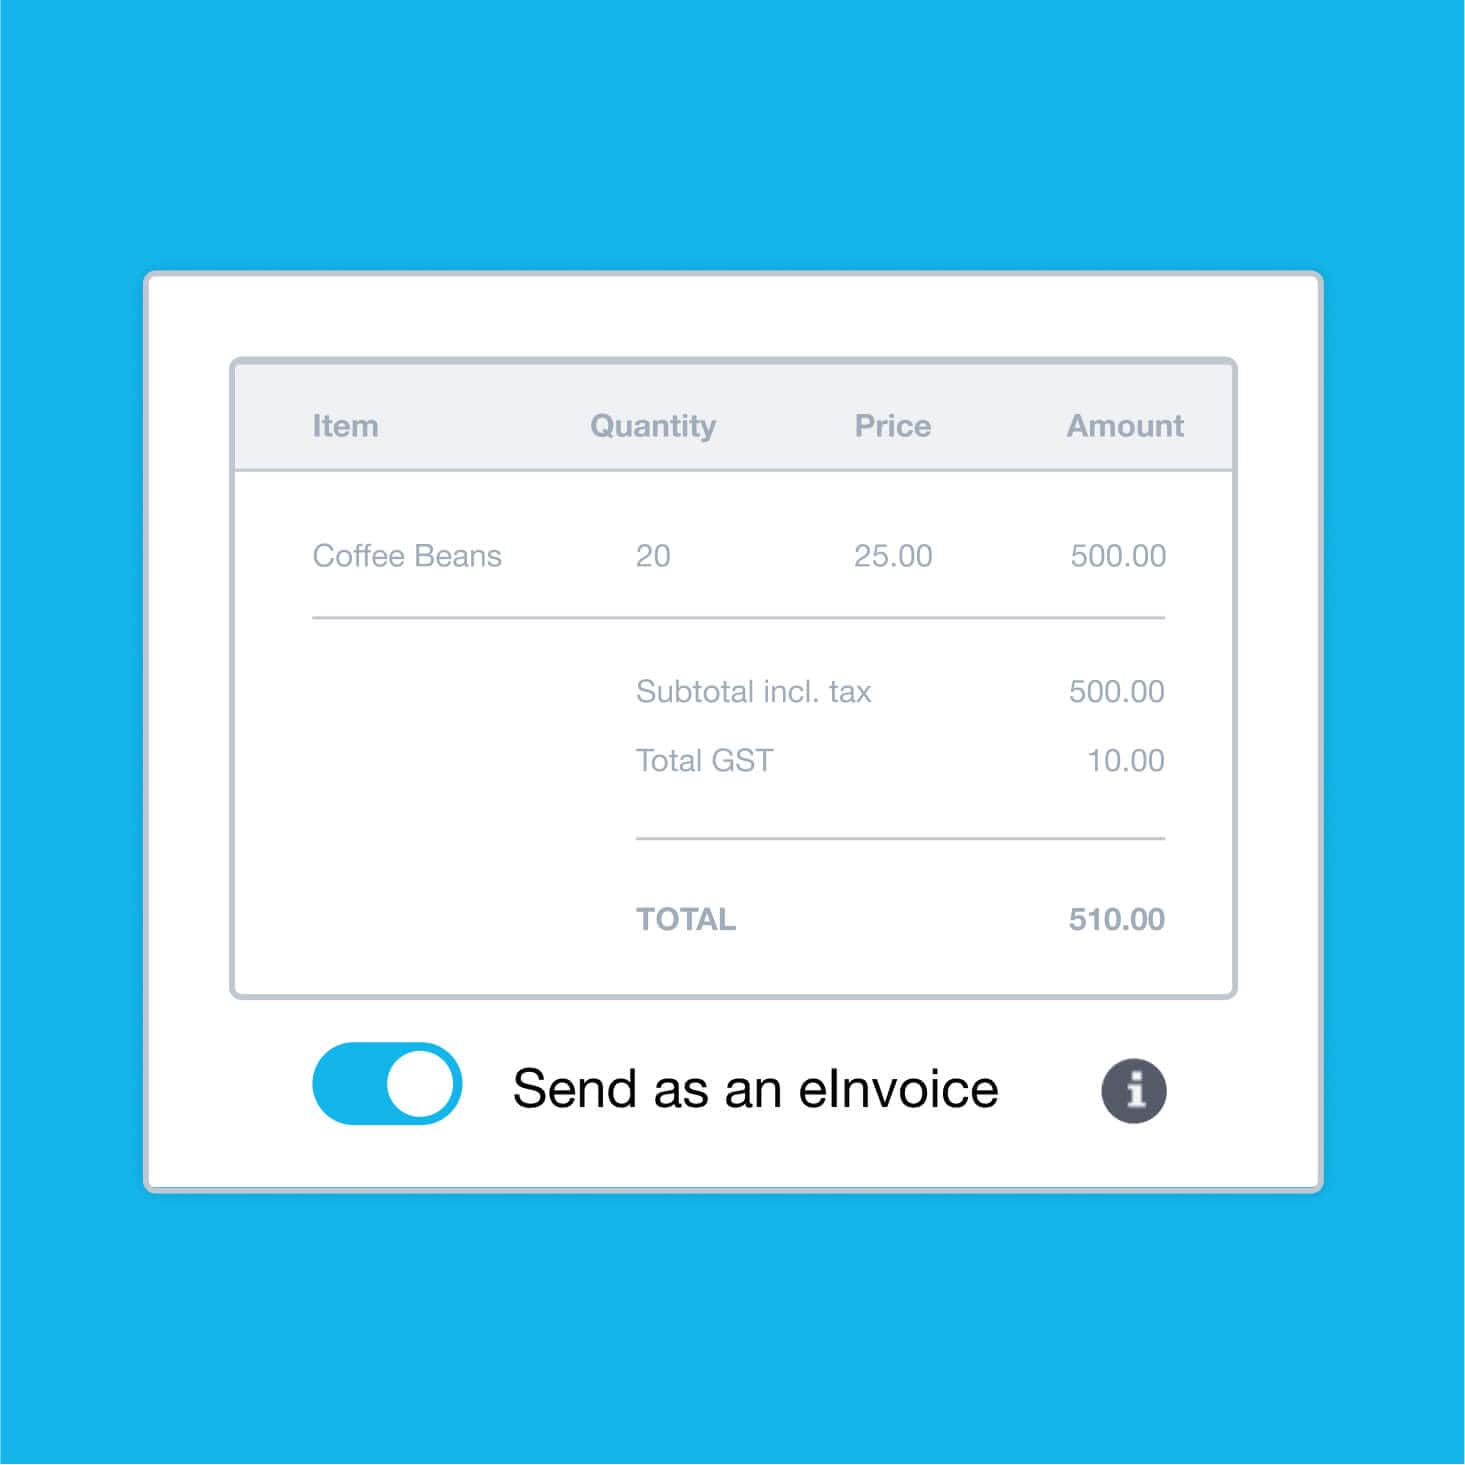 Electronic invoicing software shows a ‘Send as an e-invoice’ button so you can invoice directly.